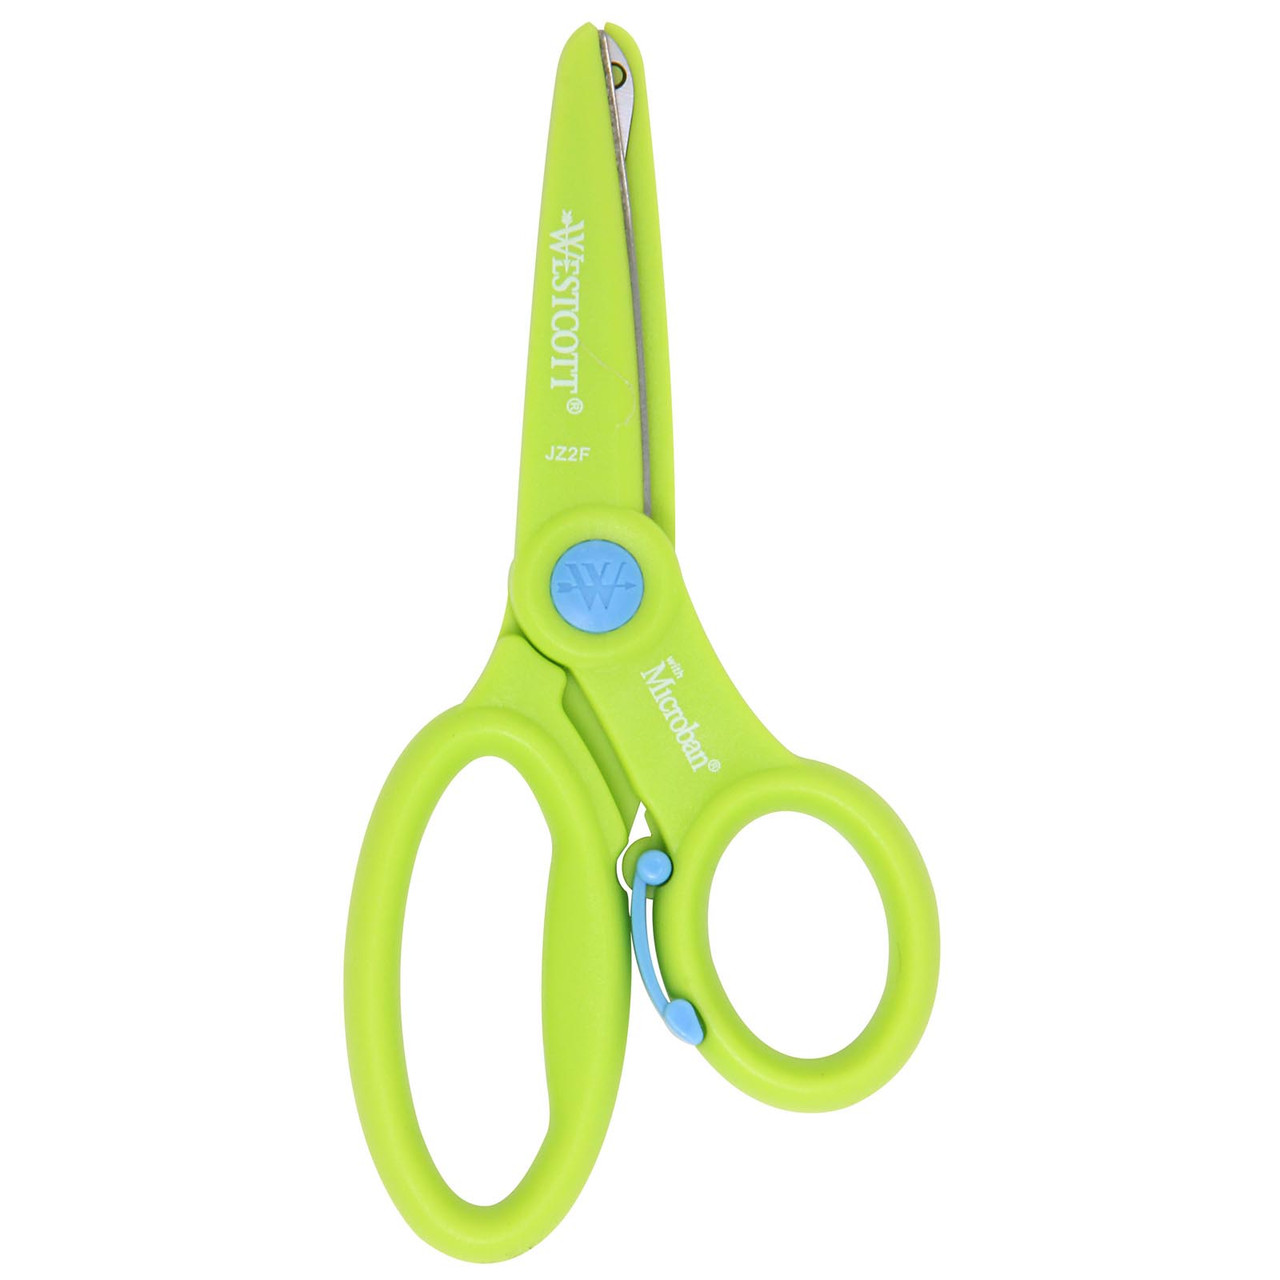 Channie's Safety Scissors for Small Hands (Ages 3-5) - Kid-Safe Plastic  Training Scissors for Preschoolers, Child Hand-Eye Coordination  Development